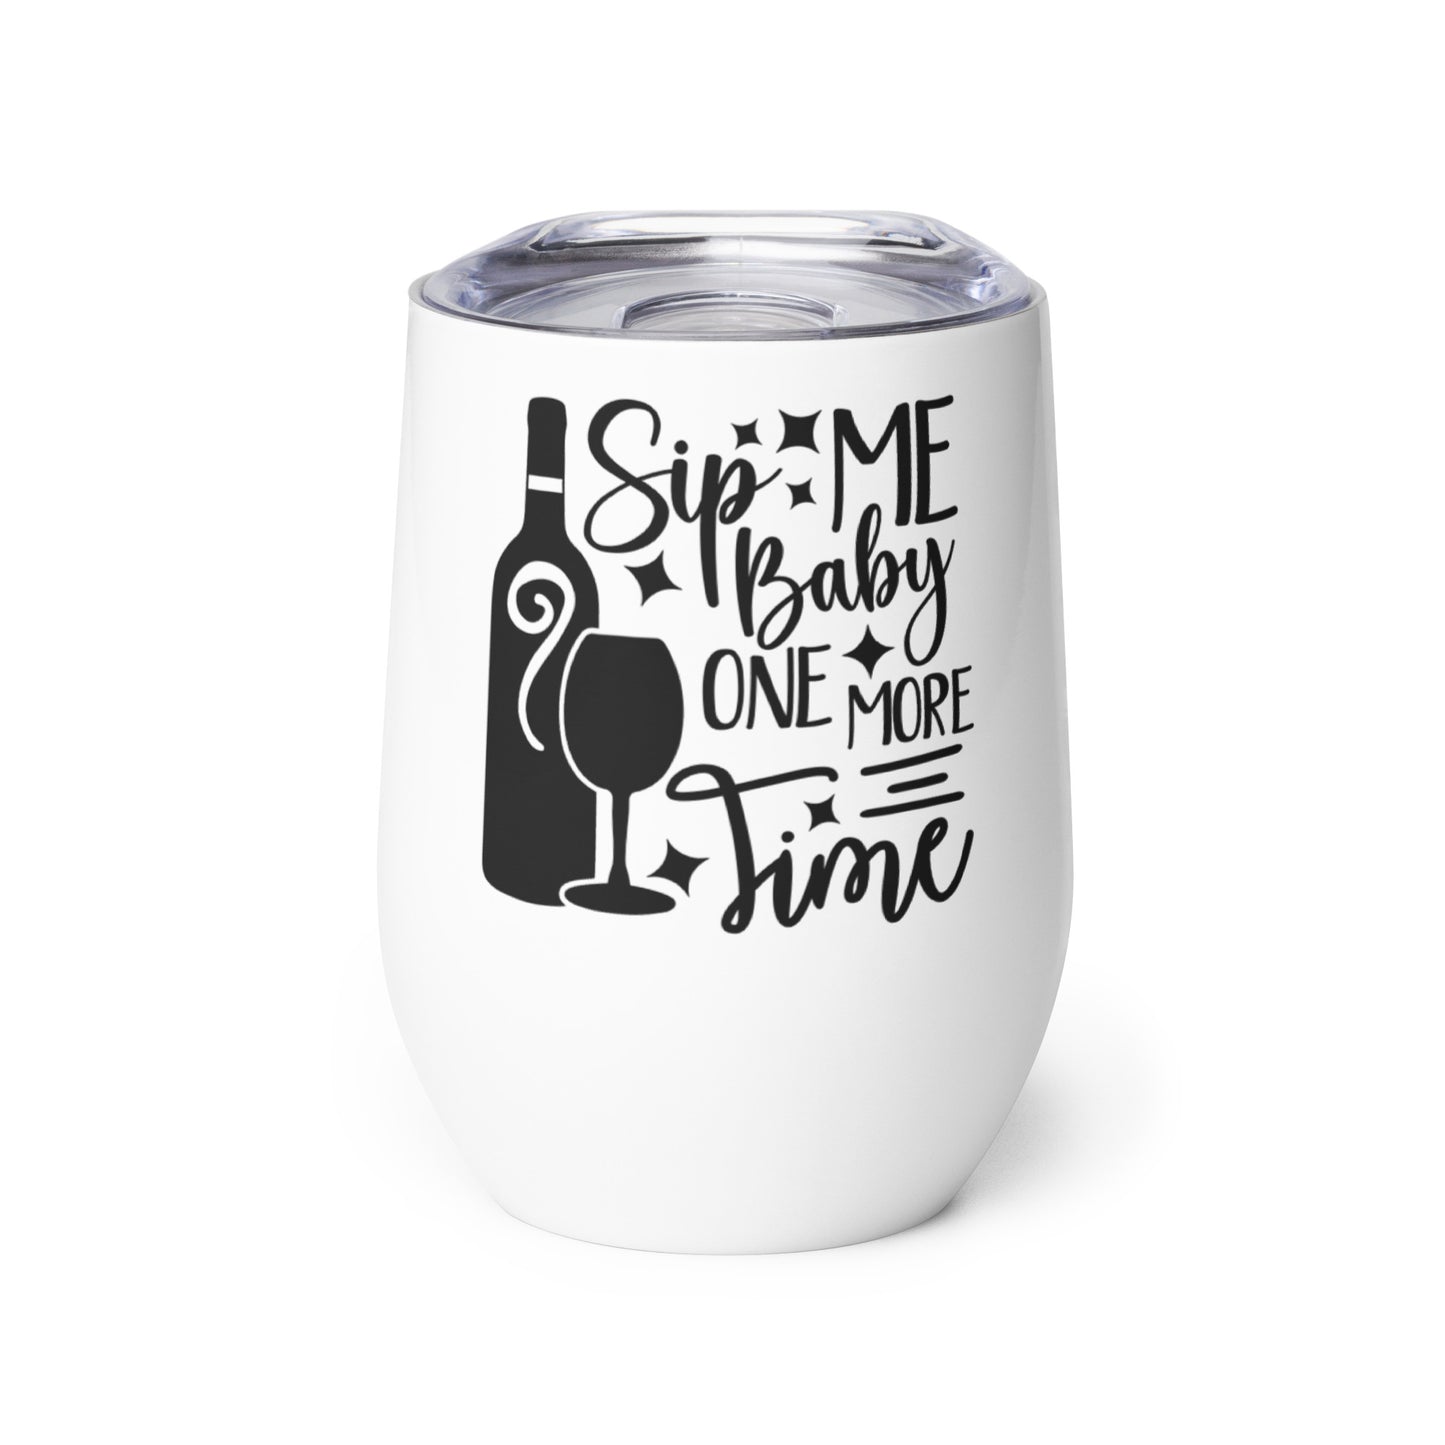 Sip Me Baby One More Time Wine tumbler